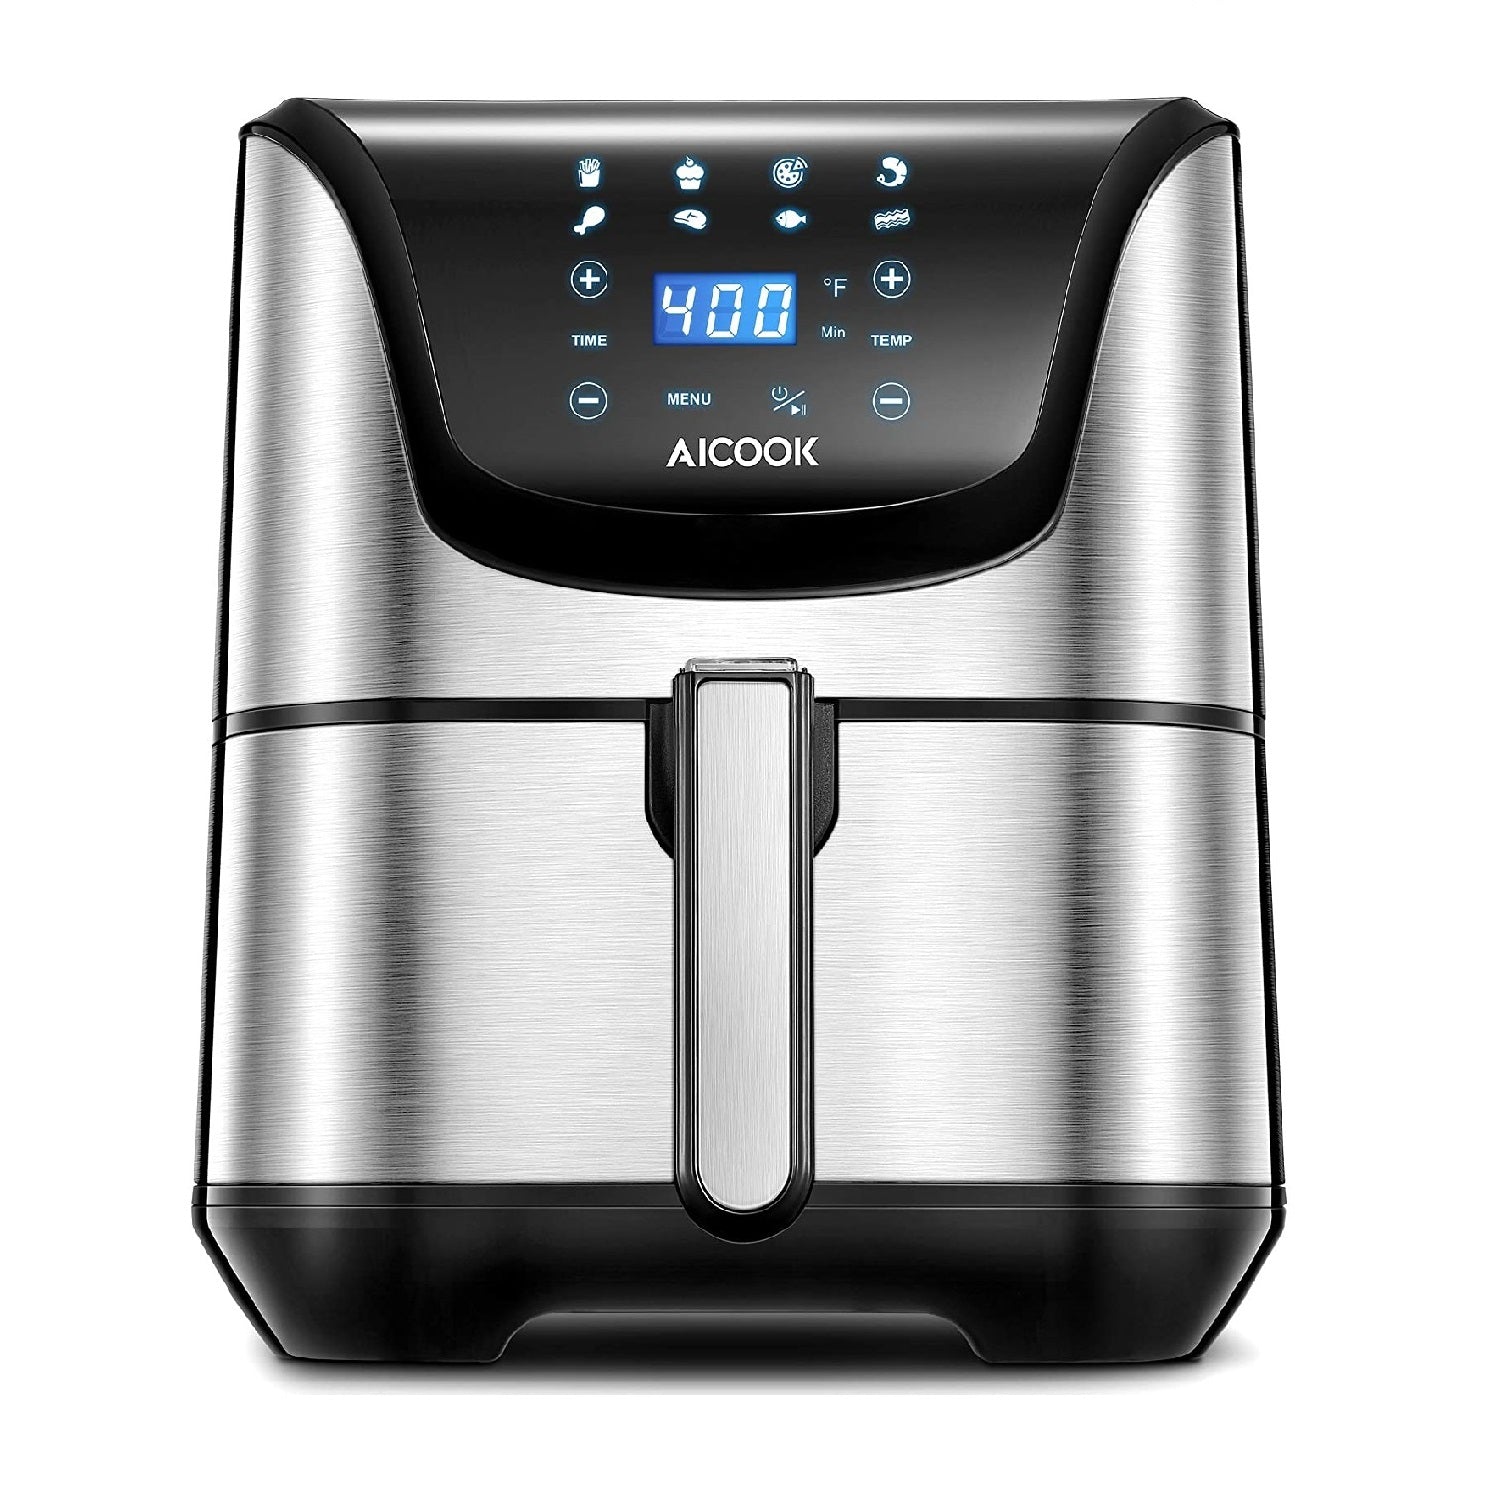 5.8qt Oil-Less Air Fryer, 1700W, 6 Functions, Digital Control,  Dishwasher-Safe, Recipe Included, Silver – AICOOK